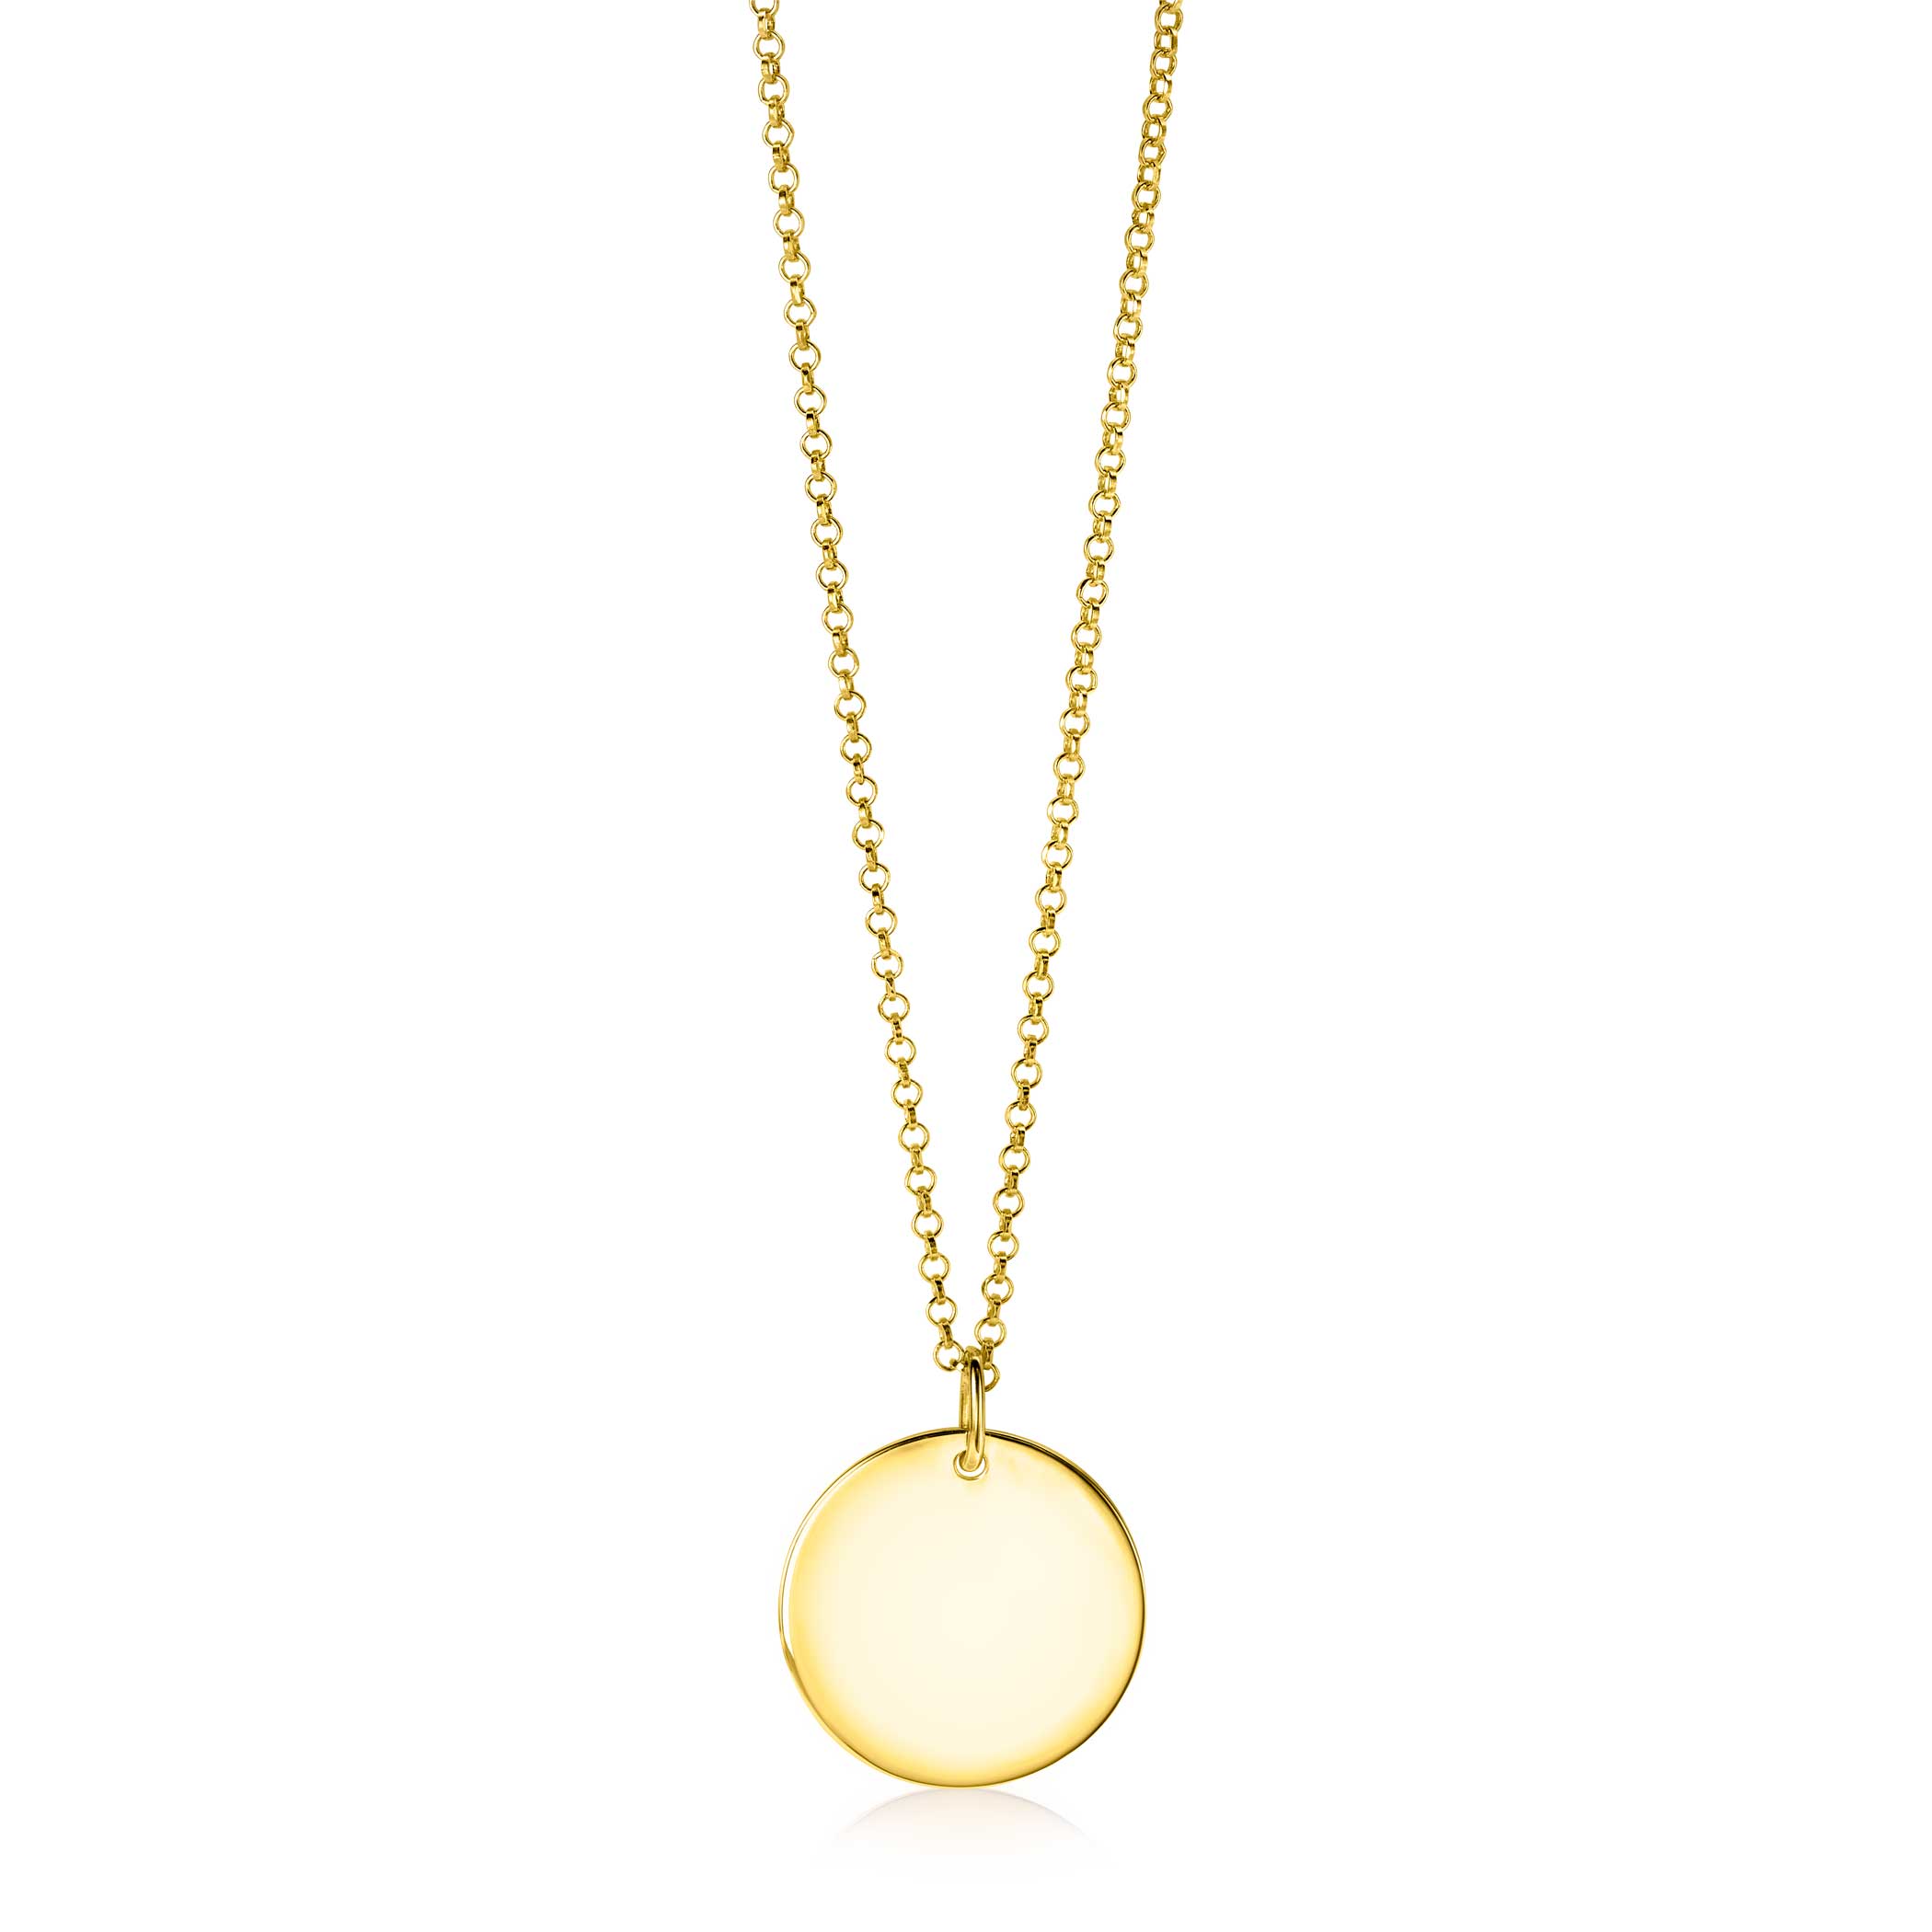 20mm ZINZI Gold Plated Sterling Silver Pendant Shiny Coin to Engrave ZIH2345G20 (excl. necklace)